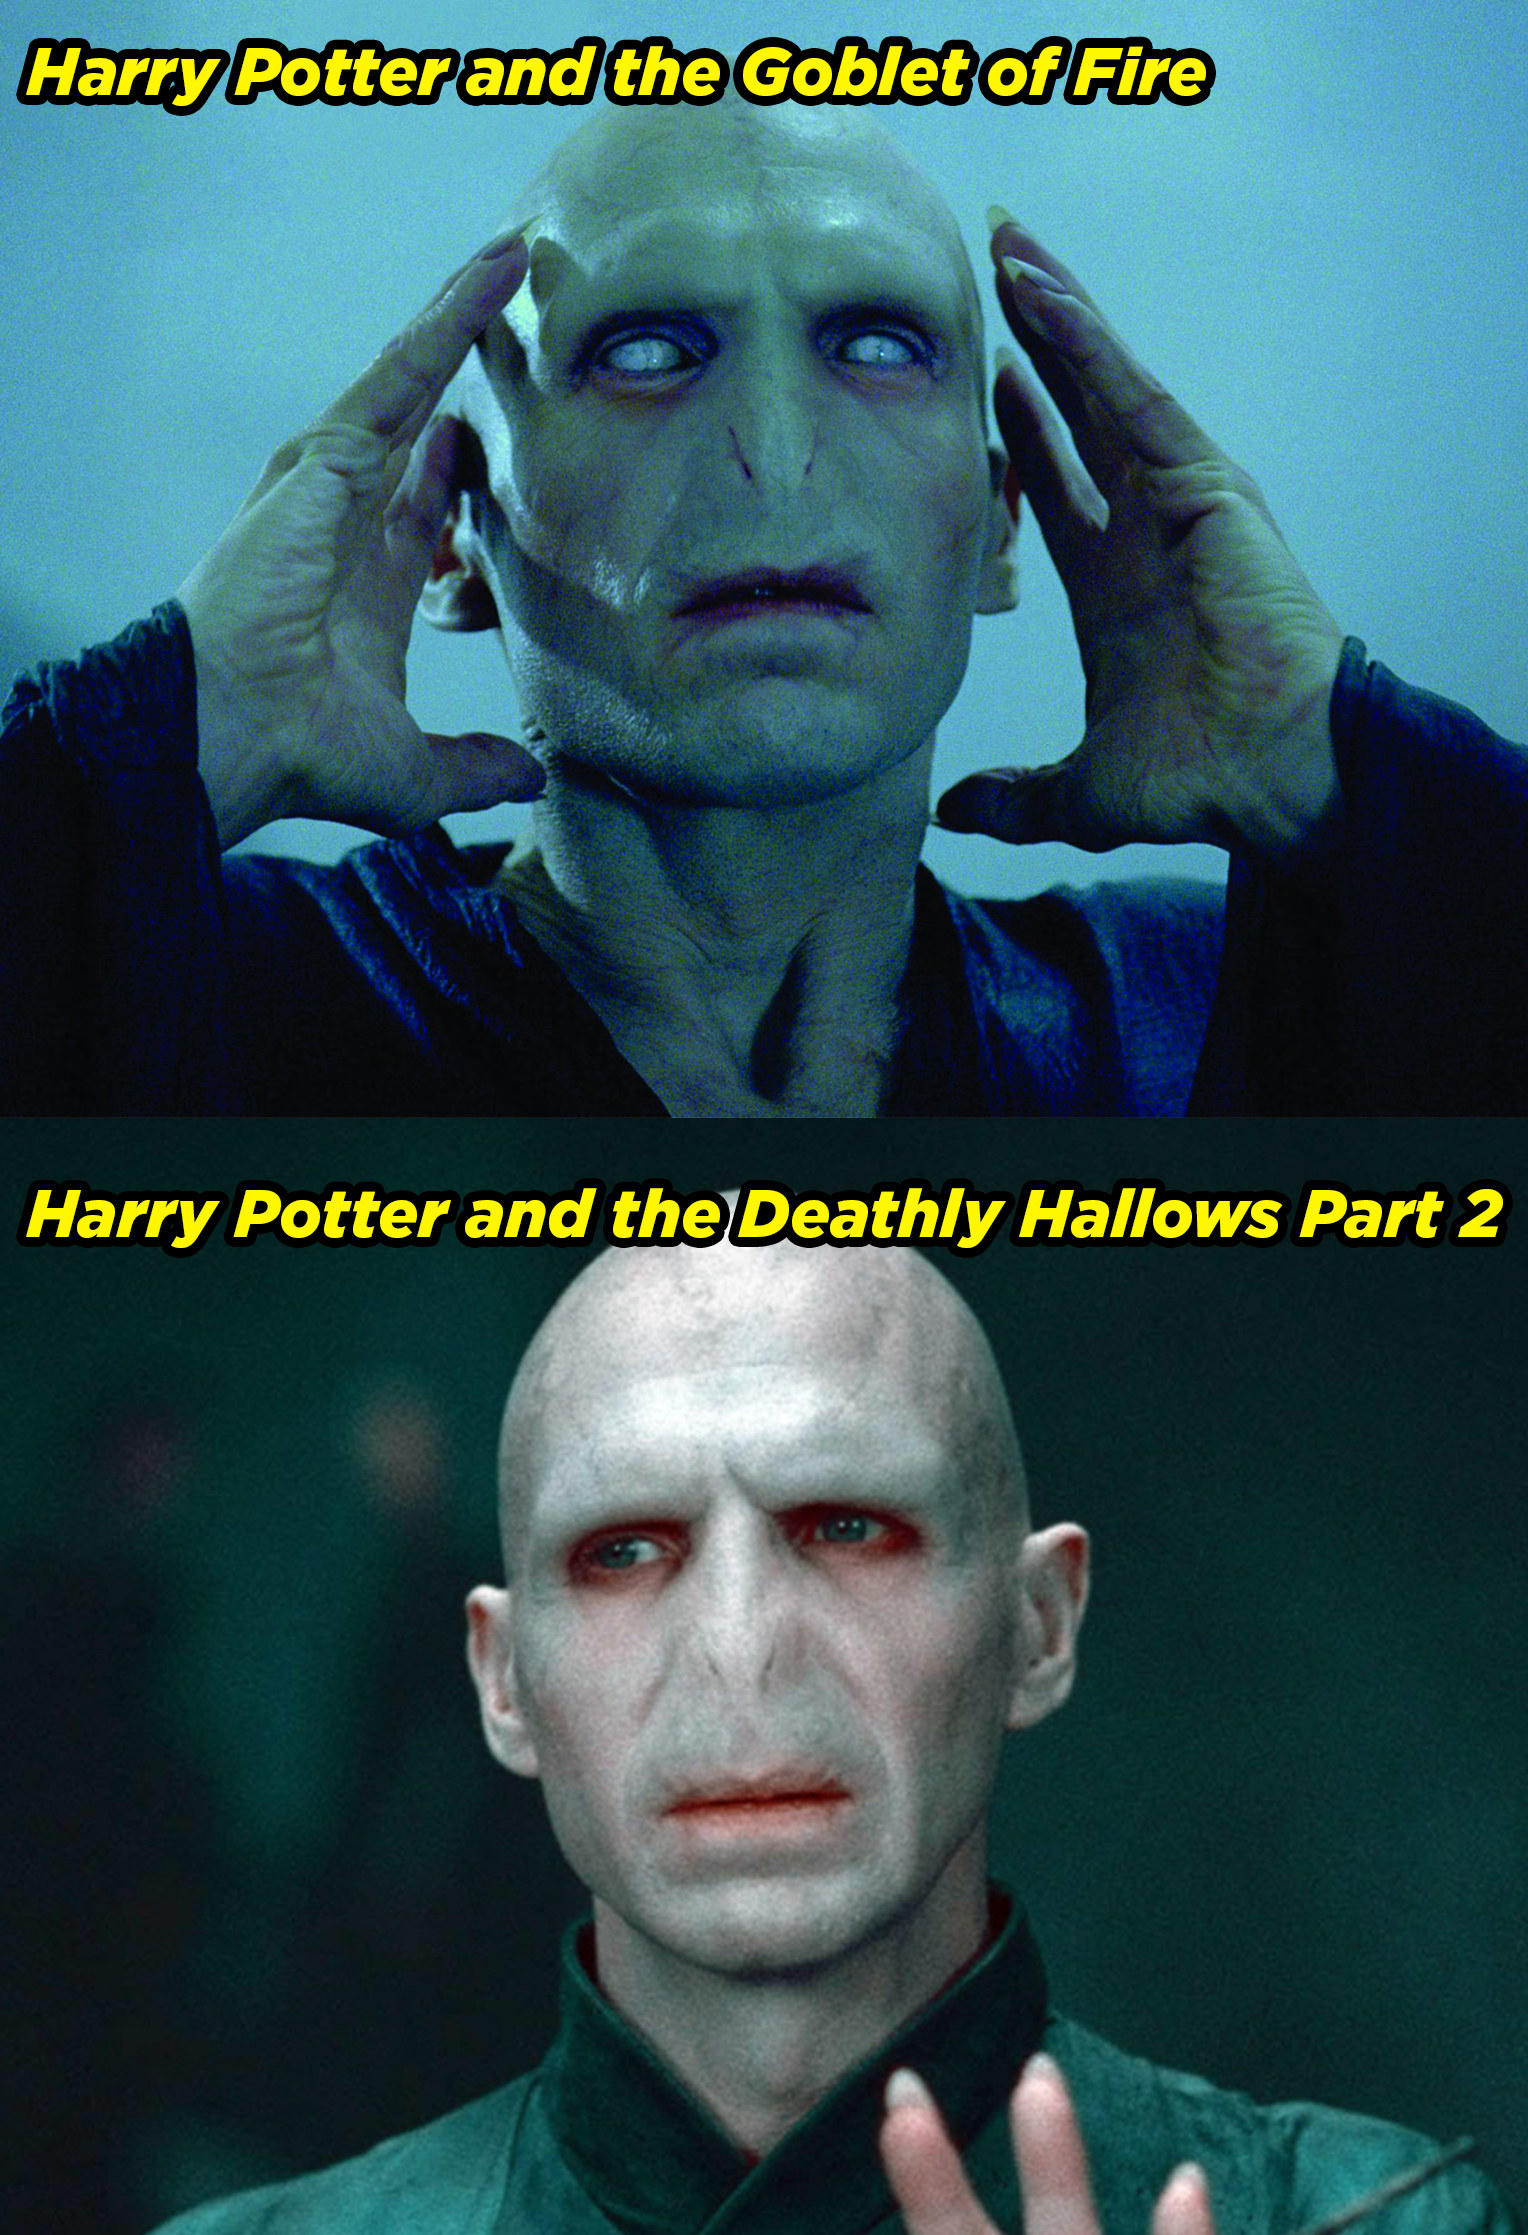 Ralph Fiennes in Goblet of Fire and Deathly Hallows Part 2